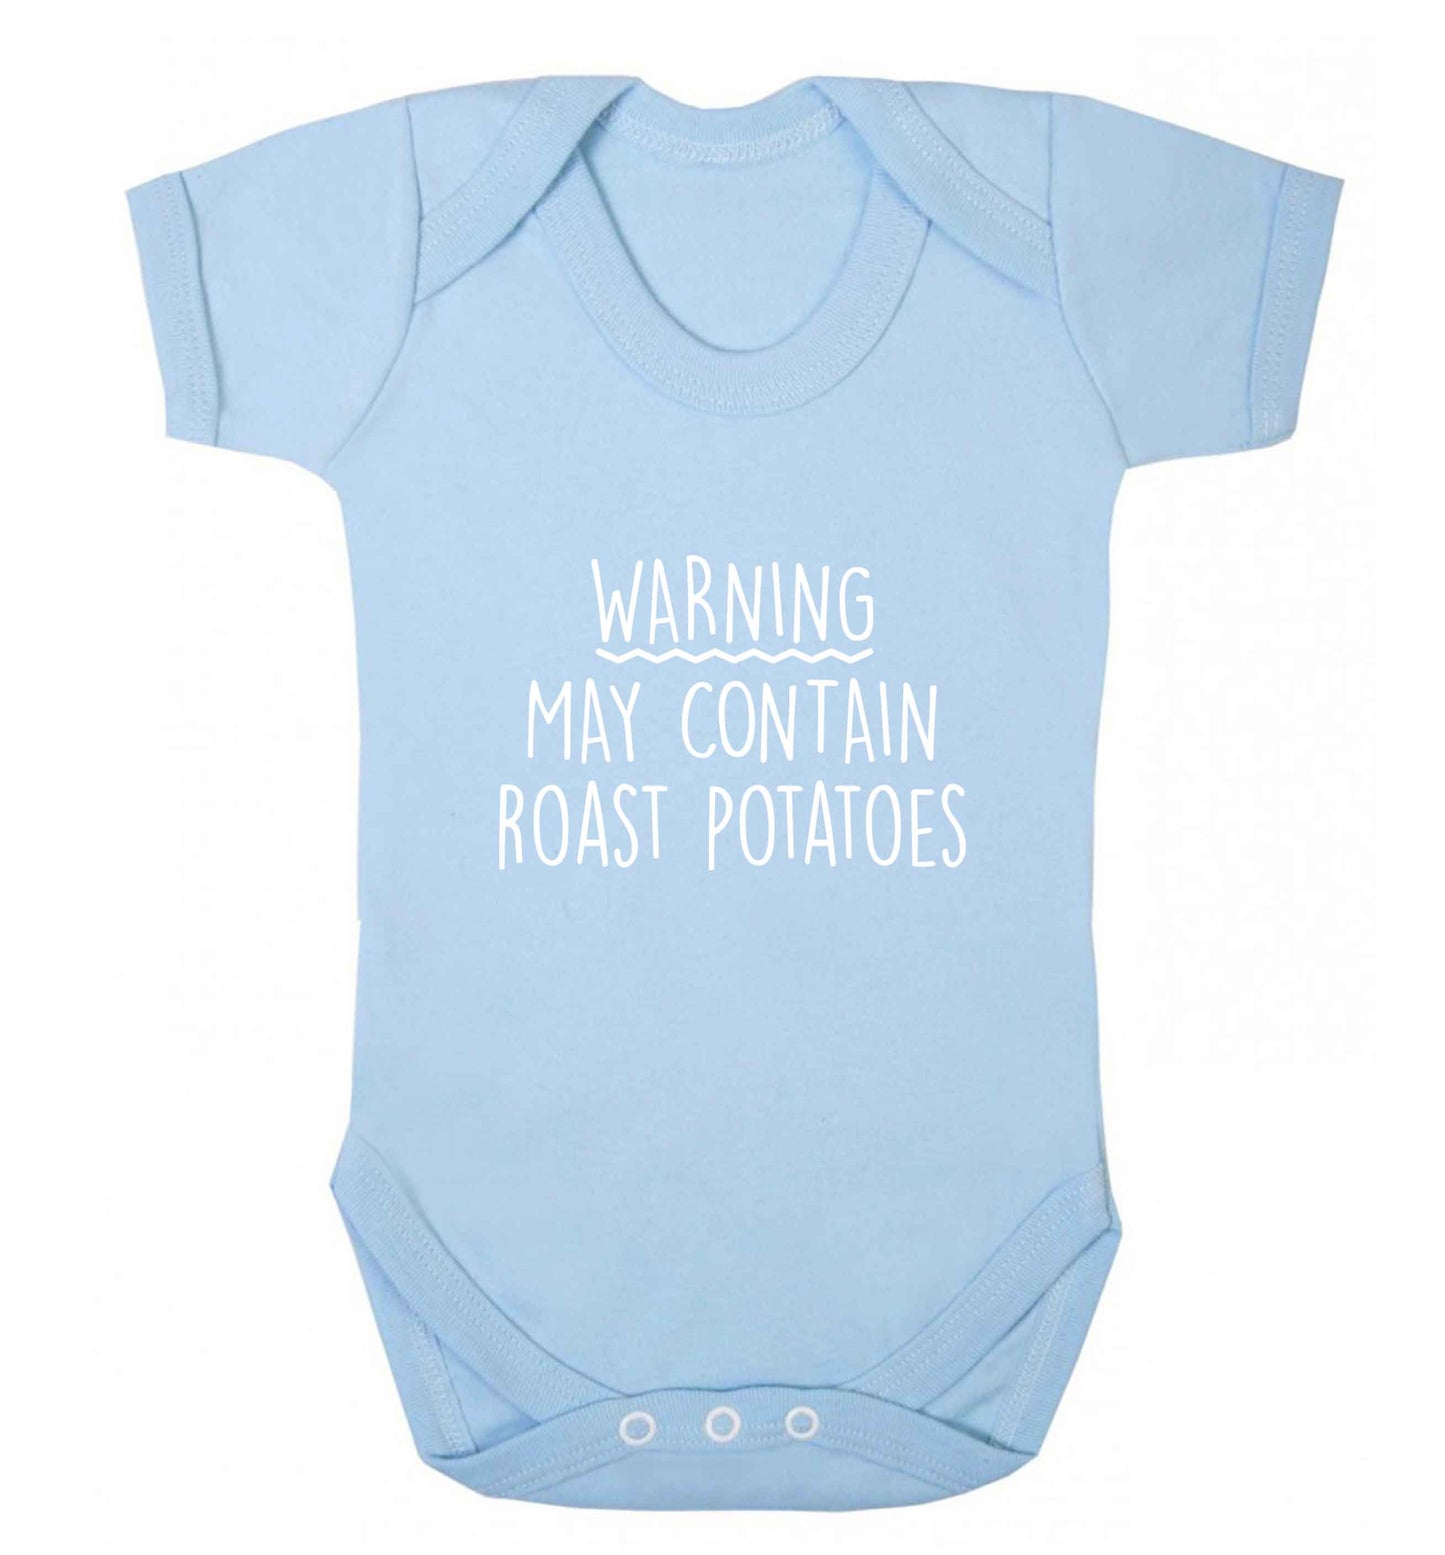 Warning may containg roast potatoes baby vest pale blue 18-24 months